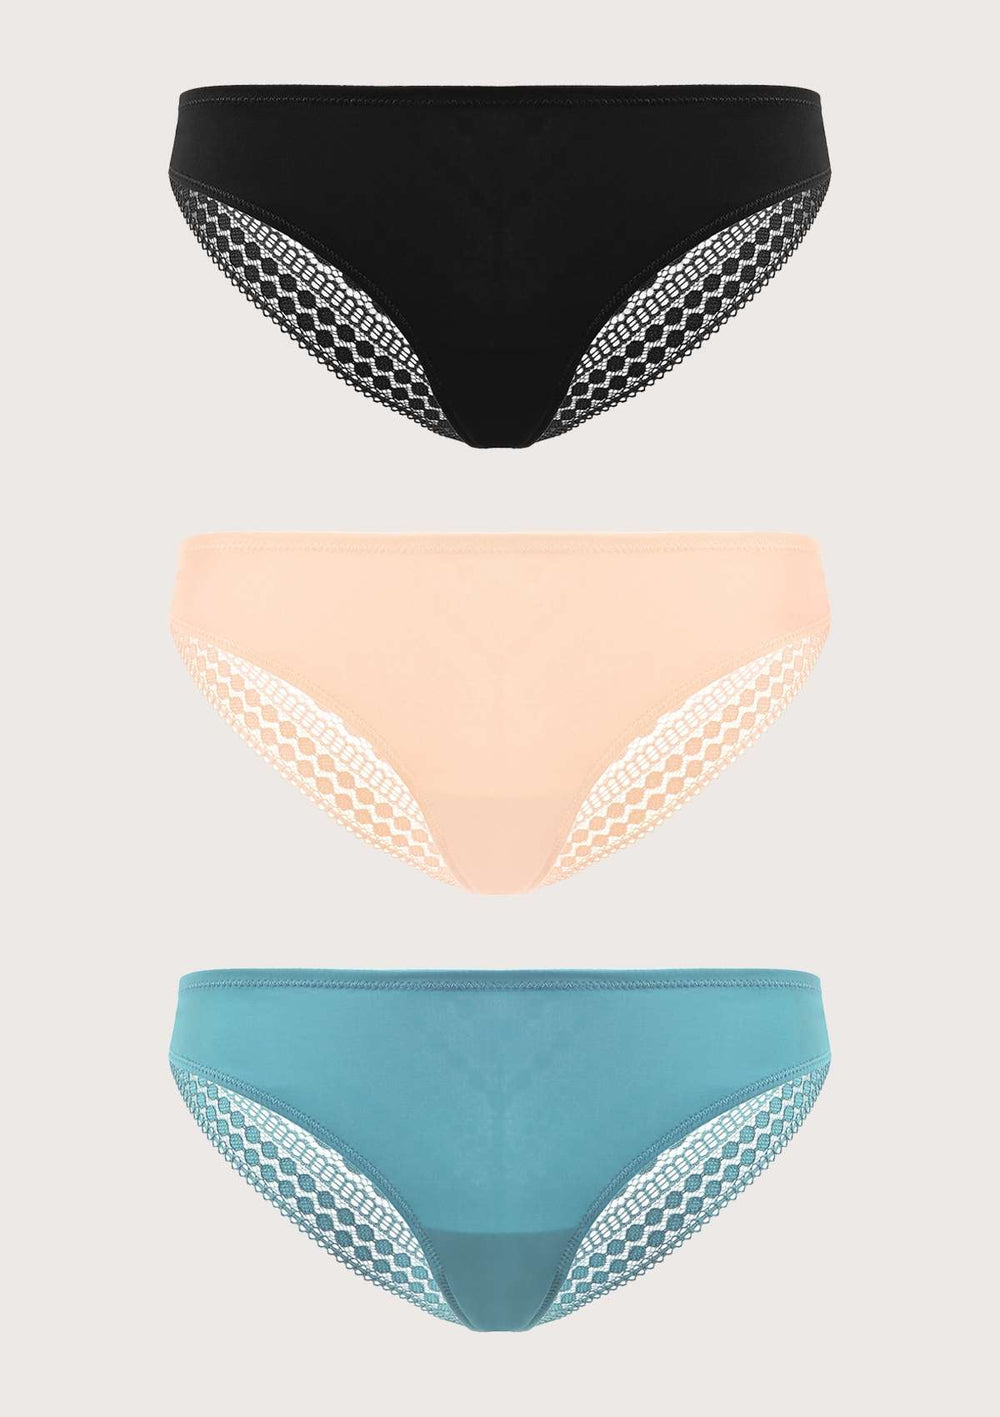 https://www.hsialife.com/cdn/shop/products/fpc0043rbbs-hsia-hsia-polka-dot-super-soft-lace-back-cheeky-panties-3-pack-s-black-rose-cloud-brittany-blue-36650071490809.jpg?v=1677909391&width=1000